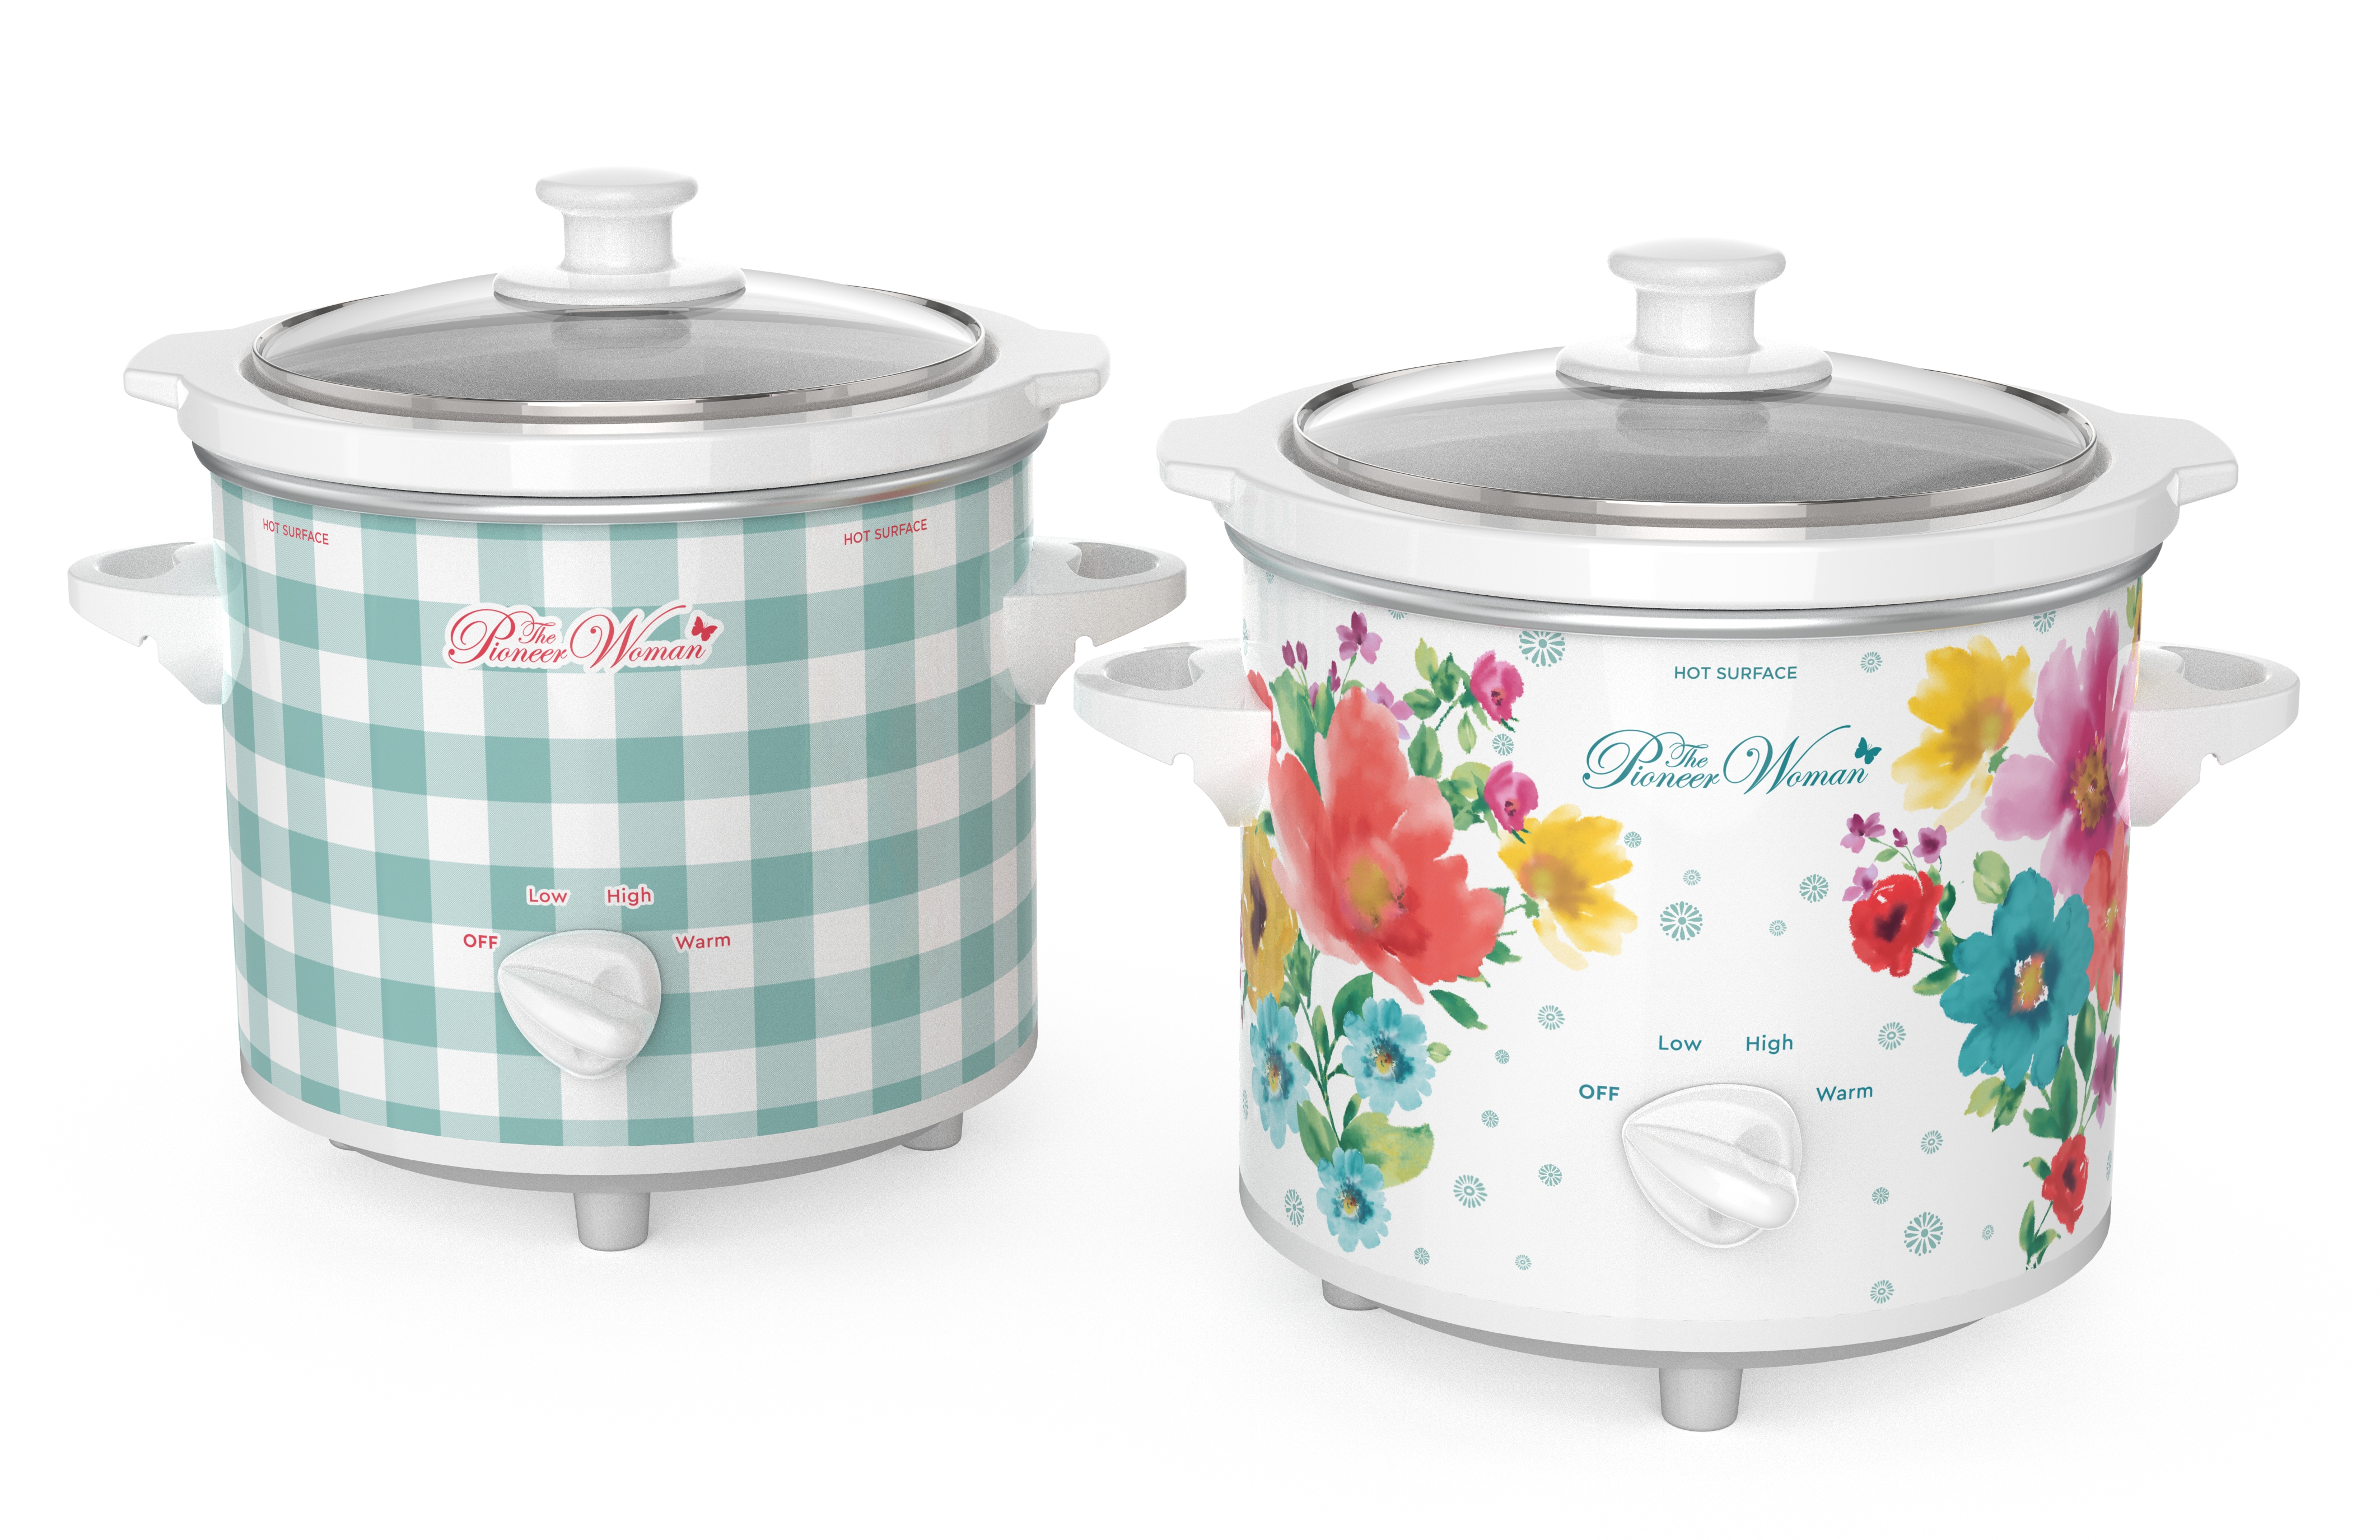 The Pioneer Woman Slow Cooker 1.5 Quart Twin Pack, Breezy Blossom and Teal Gingham, 33018 - image 1 of 10